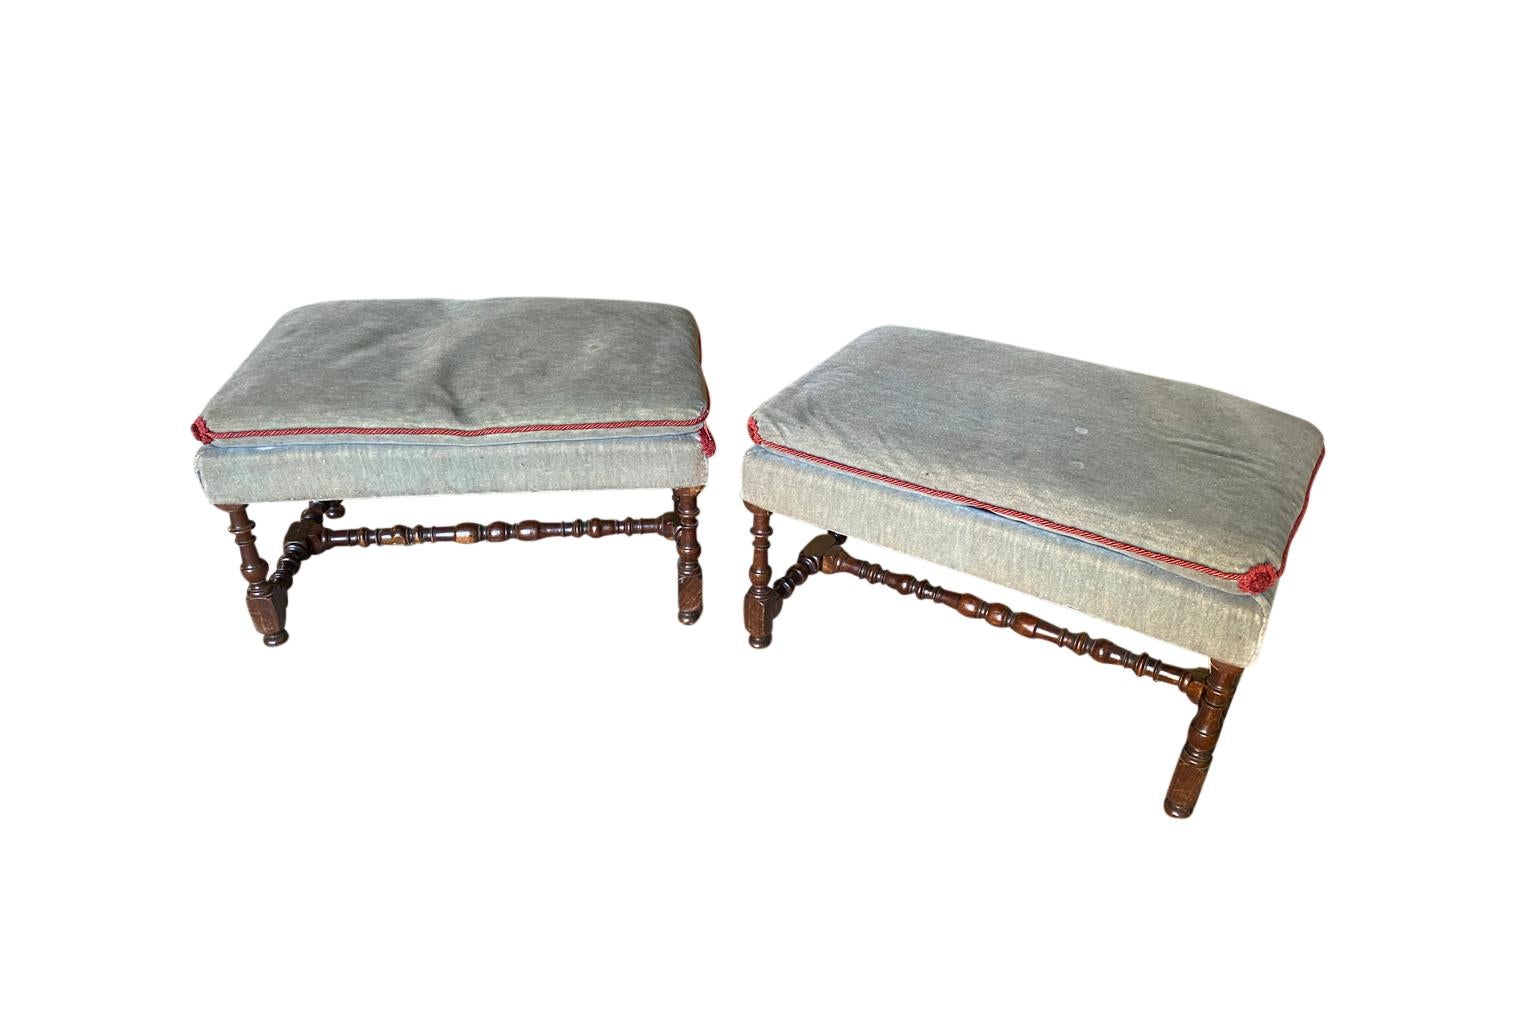 A very lovely pair of French Louis XIII style stools wonderfully constructed from richly stained chestnut with nicely turned legs and stretchers. Wonderful patina.